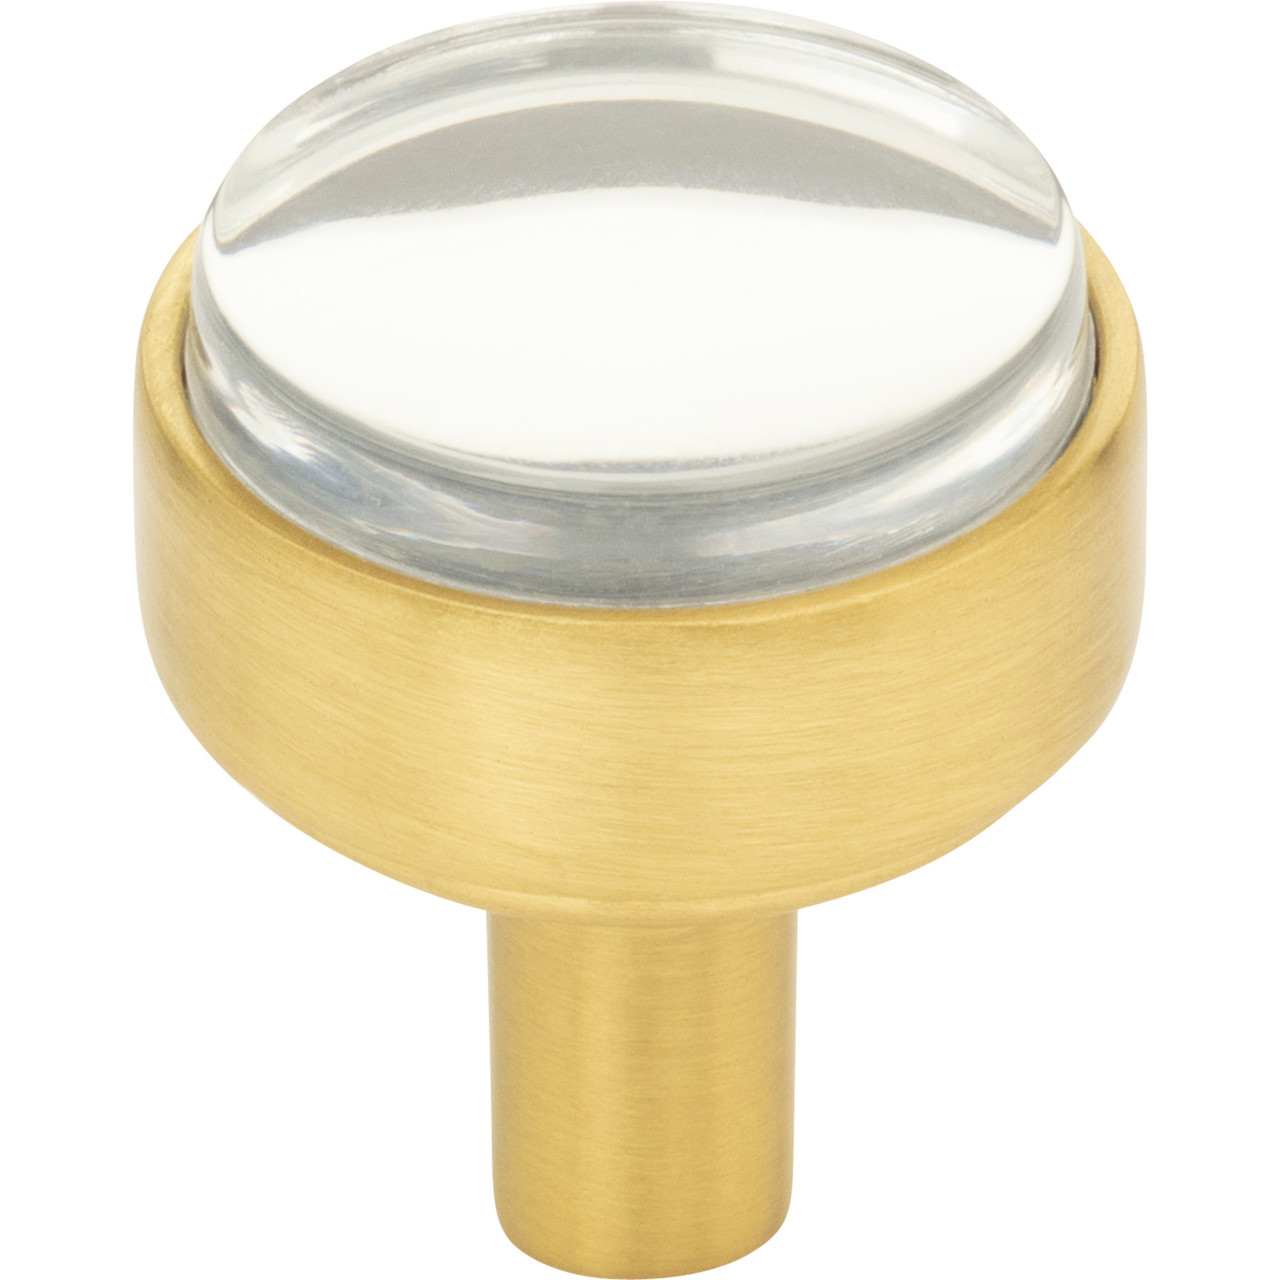 Valencia 3 Drop Pull - Polished Brass, Polished Nickel, Burnished Brass,  Oil Rubbed Bronze